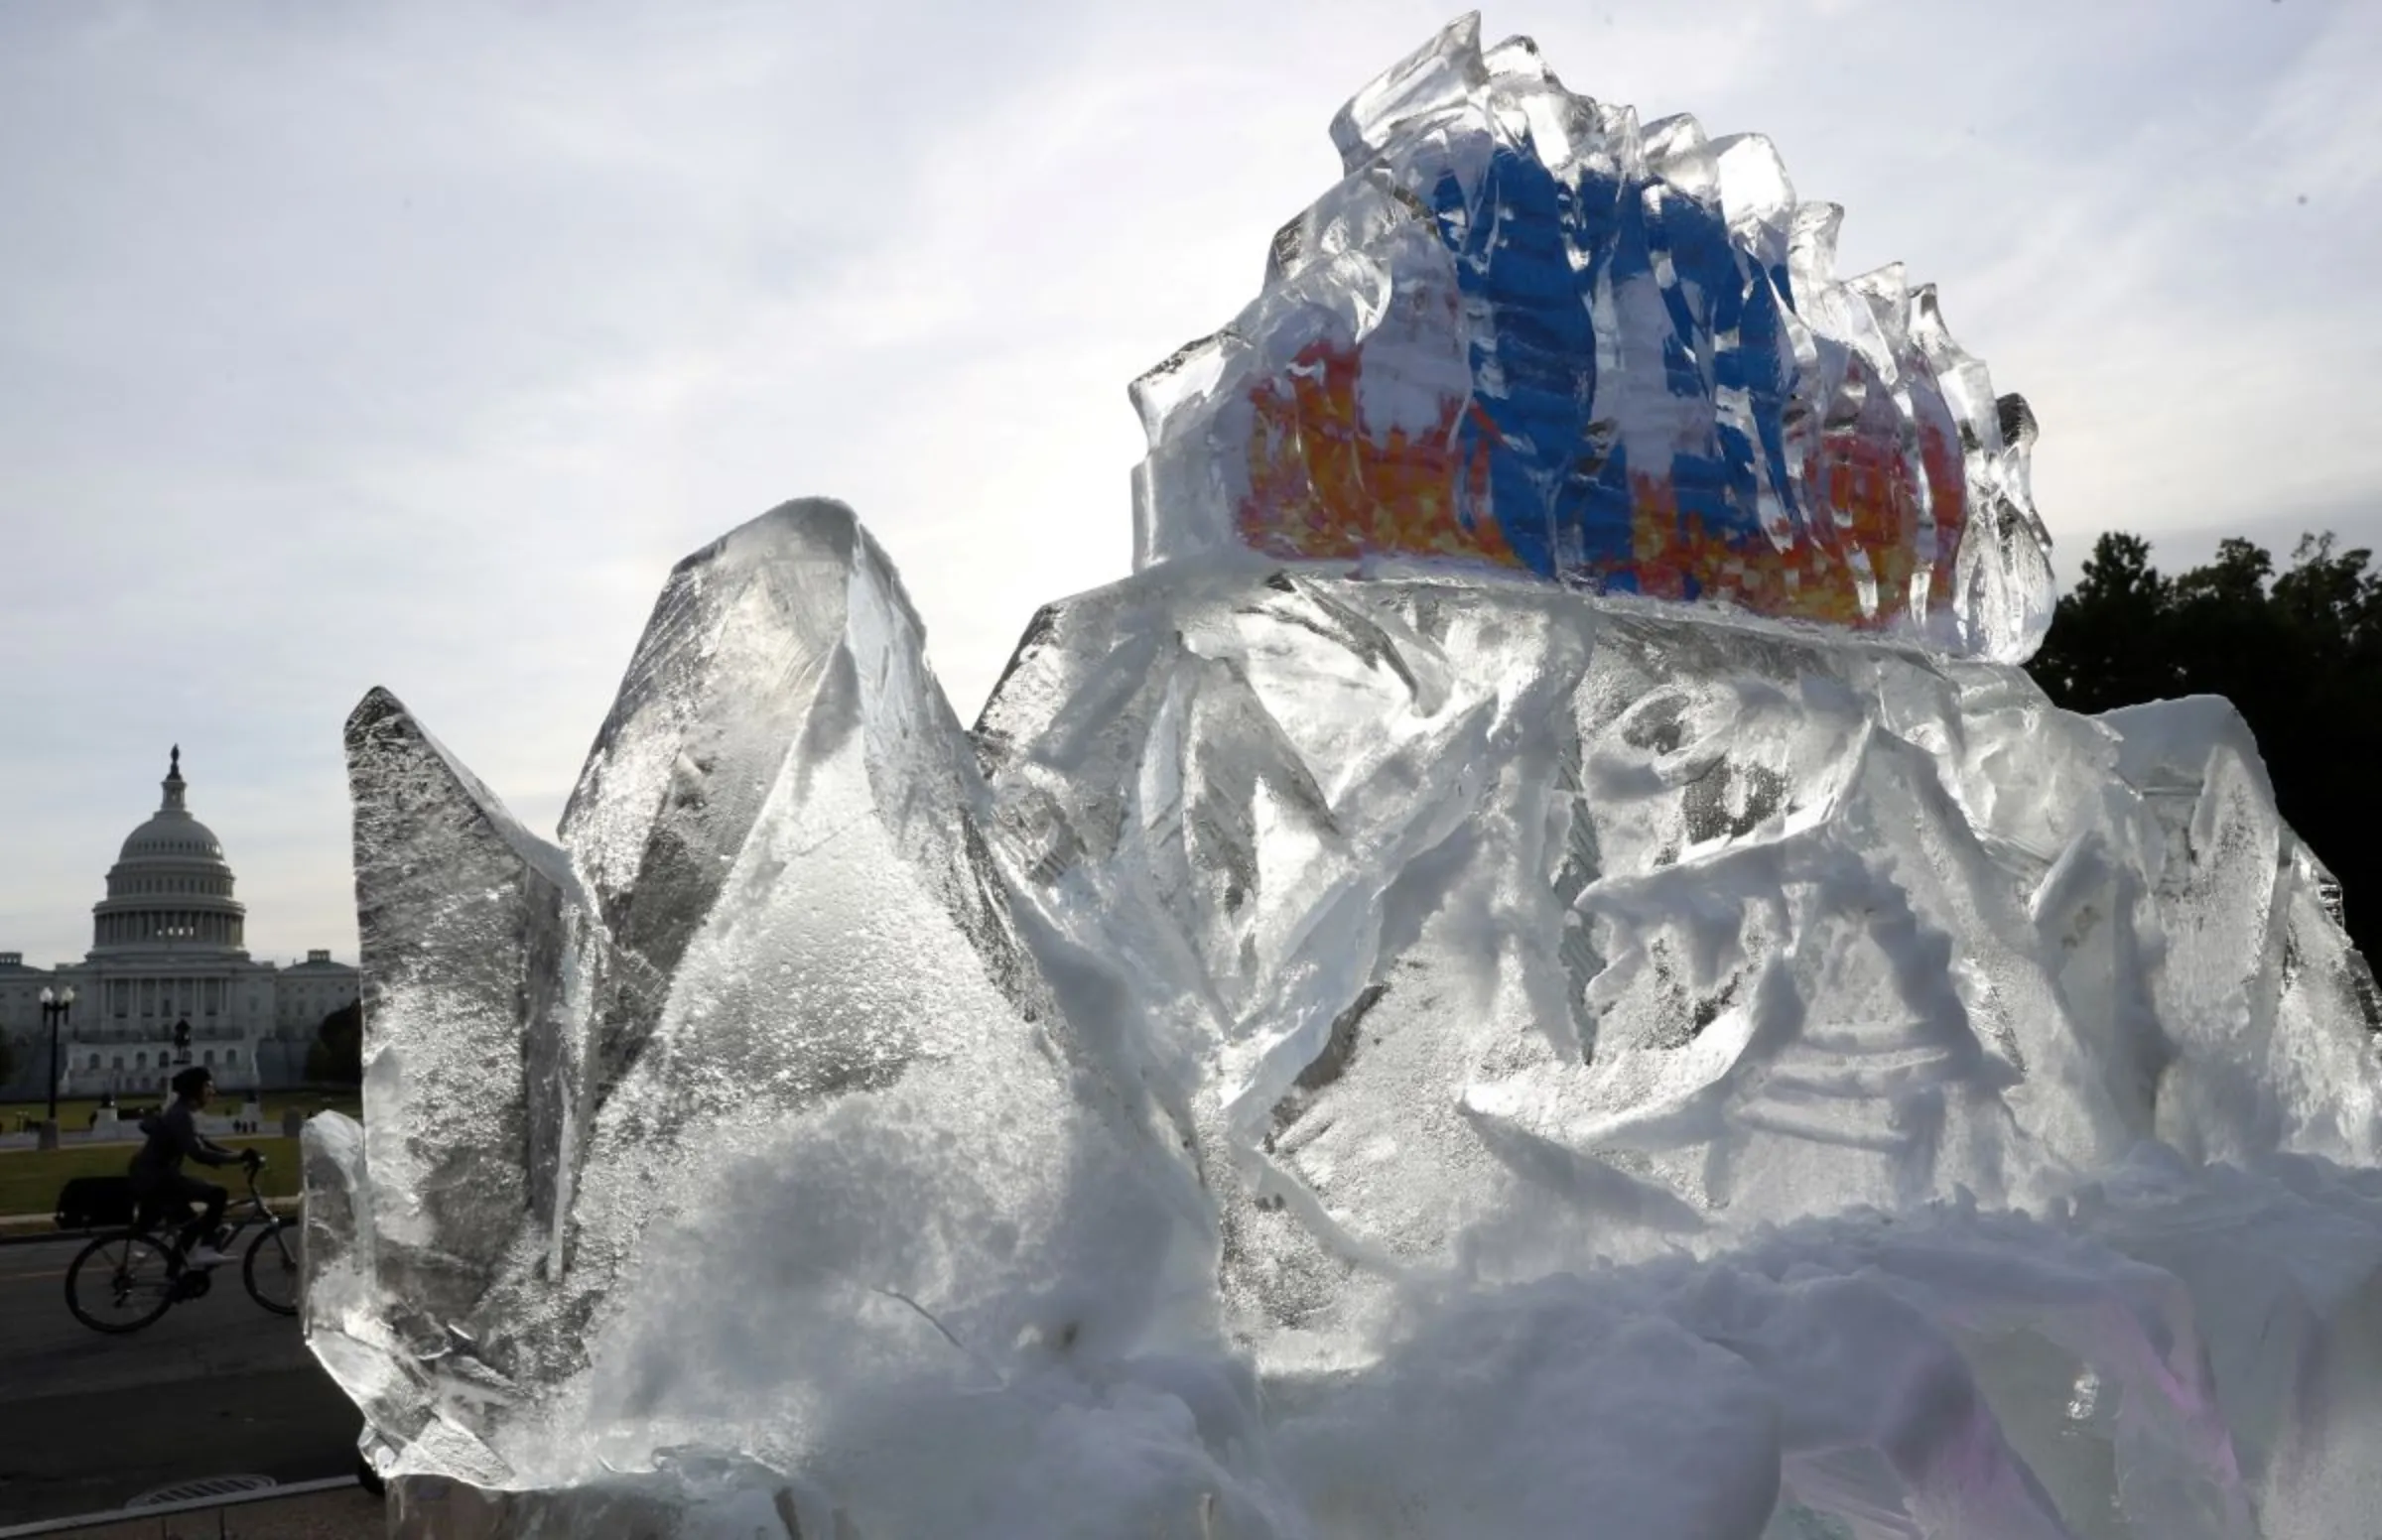 An ice sculpture with Facebook’s logo embedded on the inside melts near the U.S. Capitol building, as part of a protest over Facebook’s role in the spread of climate misinformation online in Washington, U.S., November 4, 2021